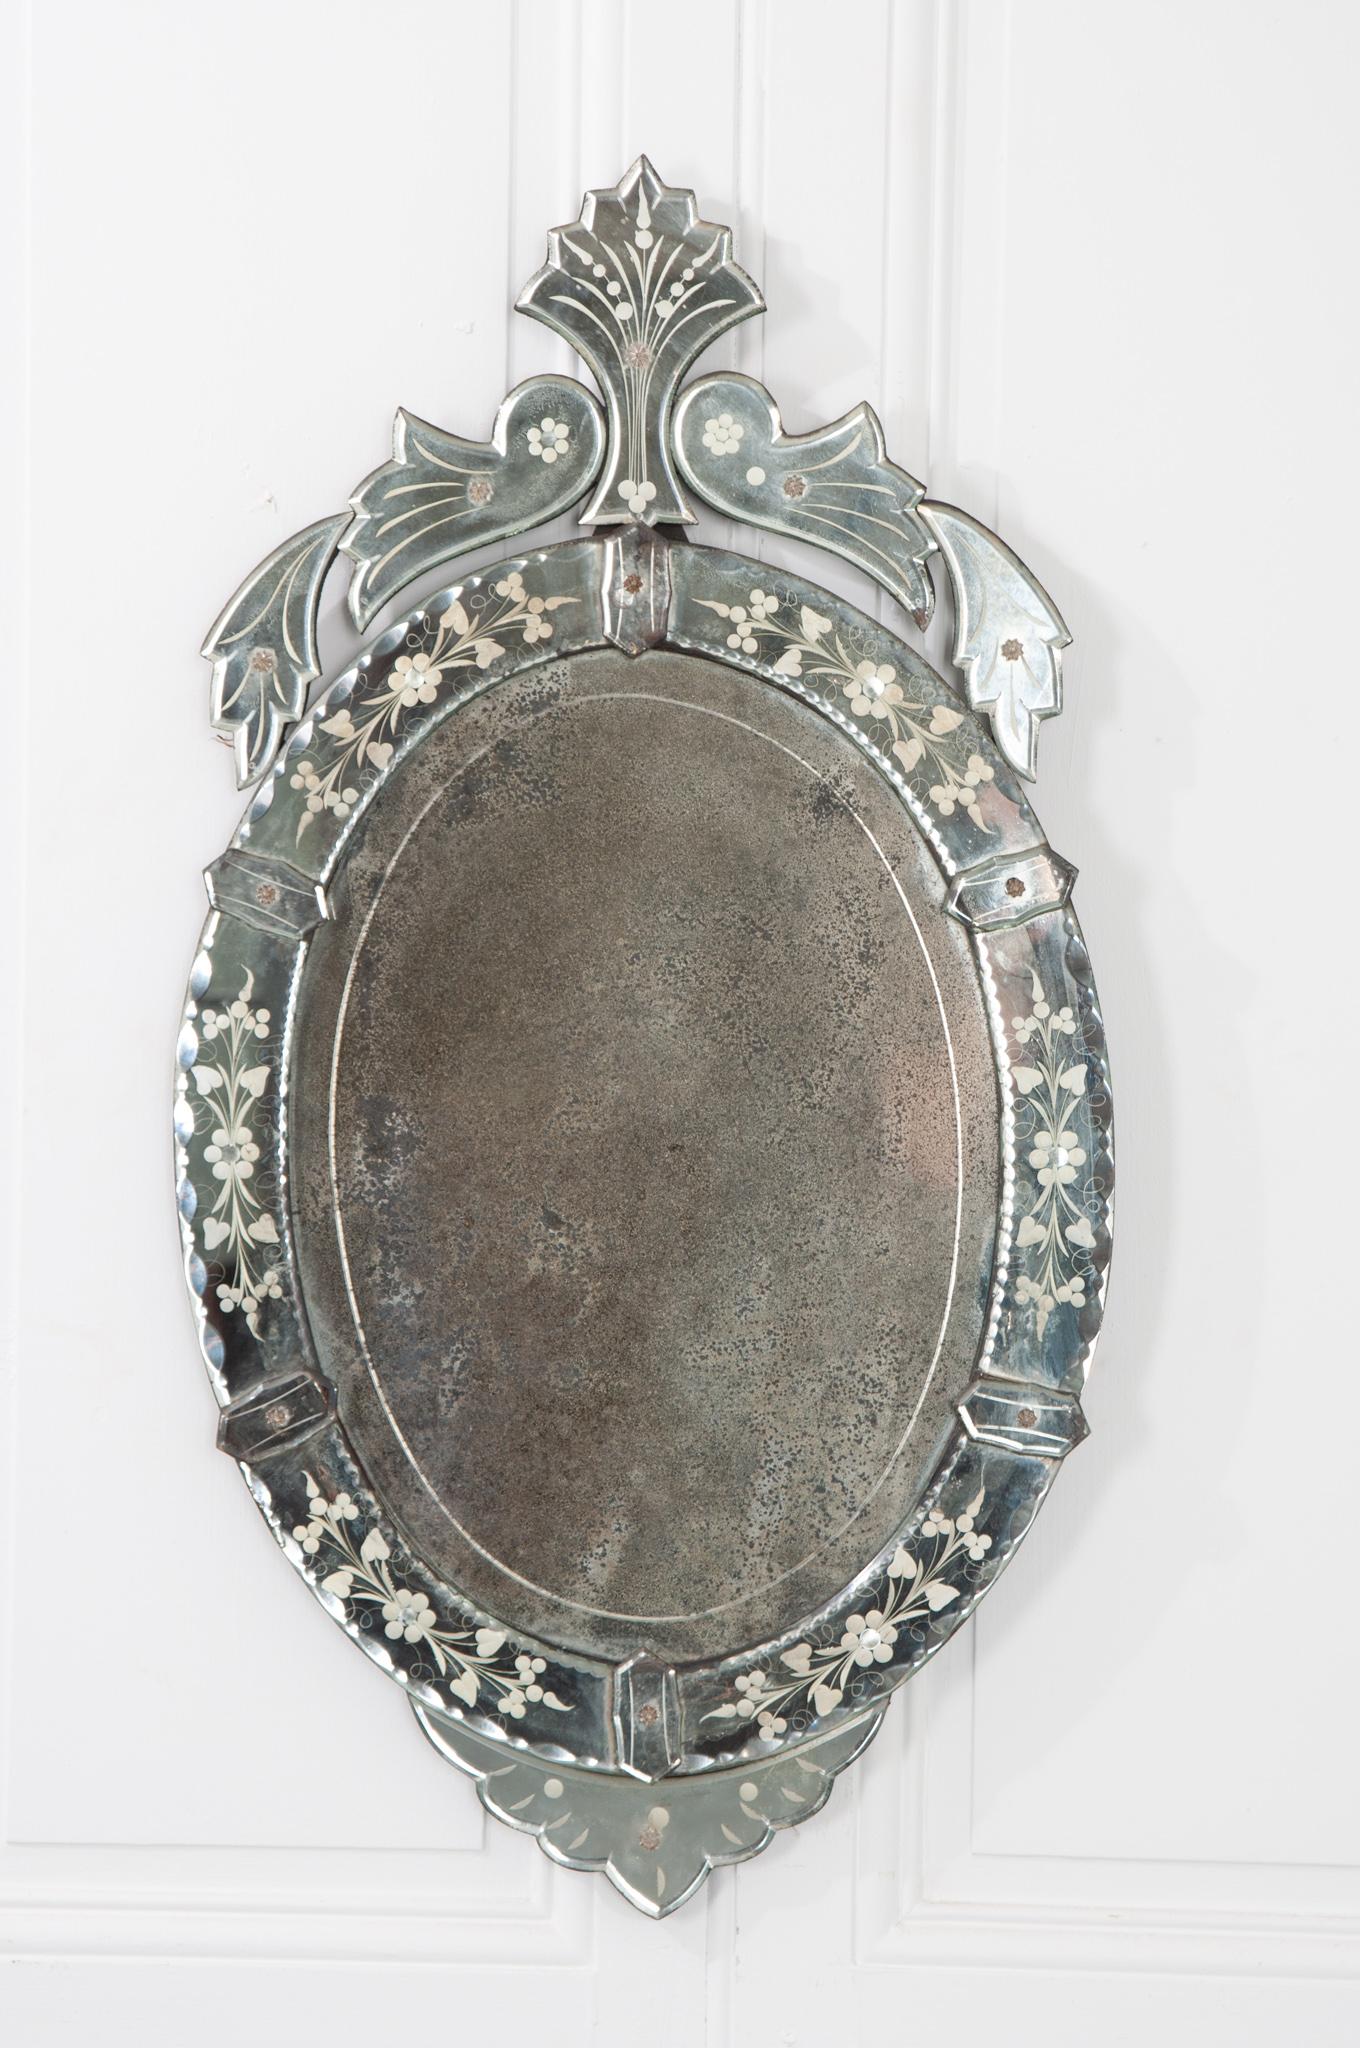 This is a lovely Venetian oval mirror from Italy. Its original plate has lots of foxing and aging. It would definitely add Old World elegance to any space. Be sure to view the detailed images.
  